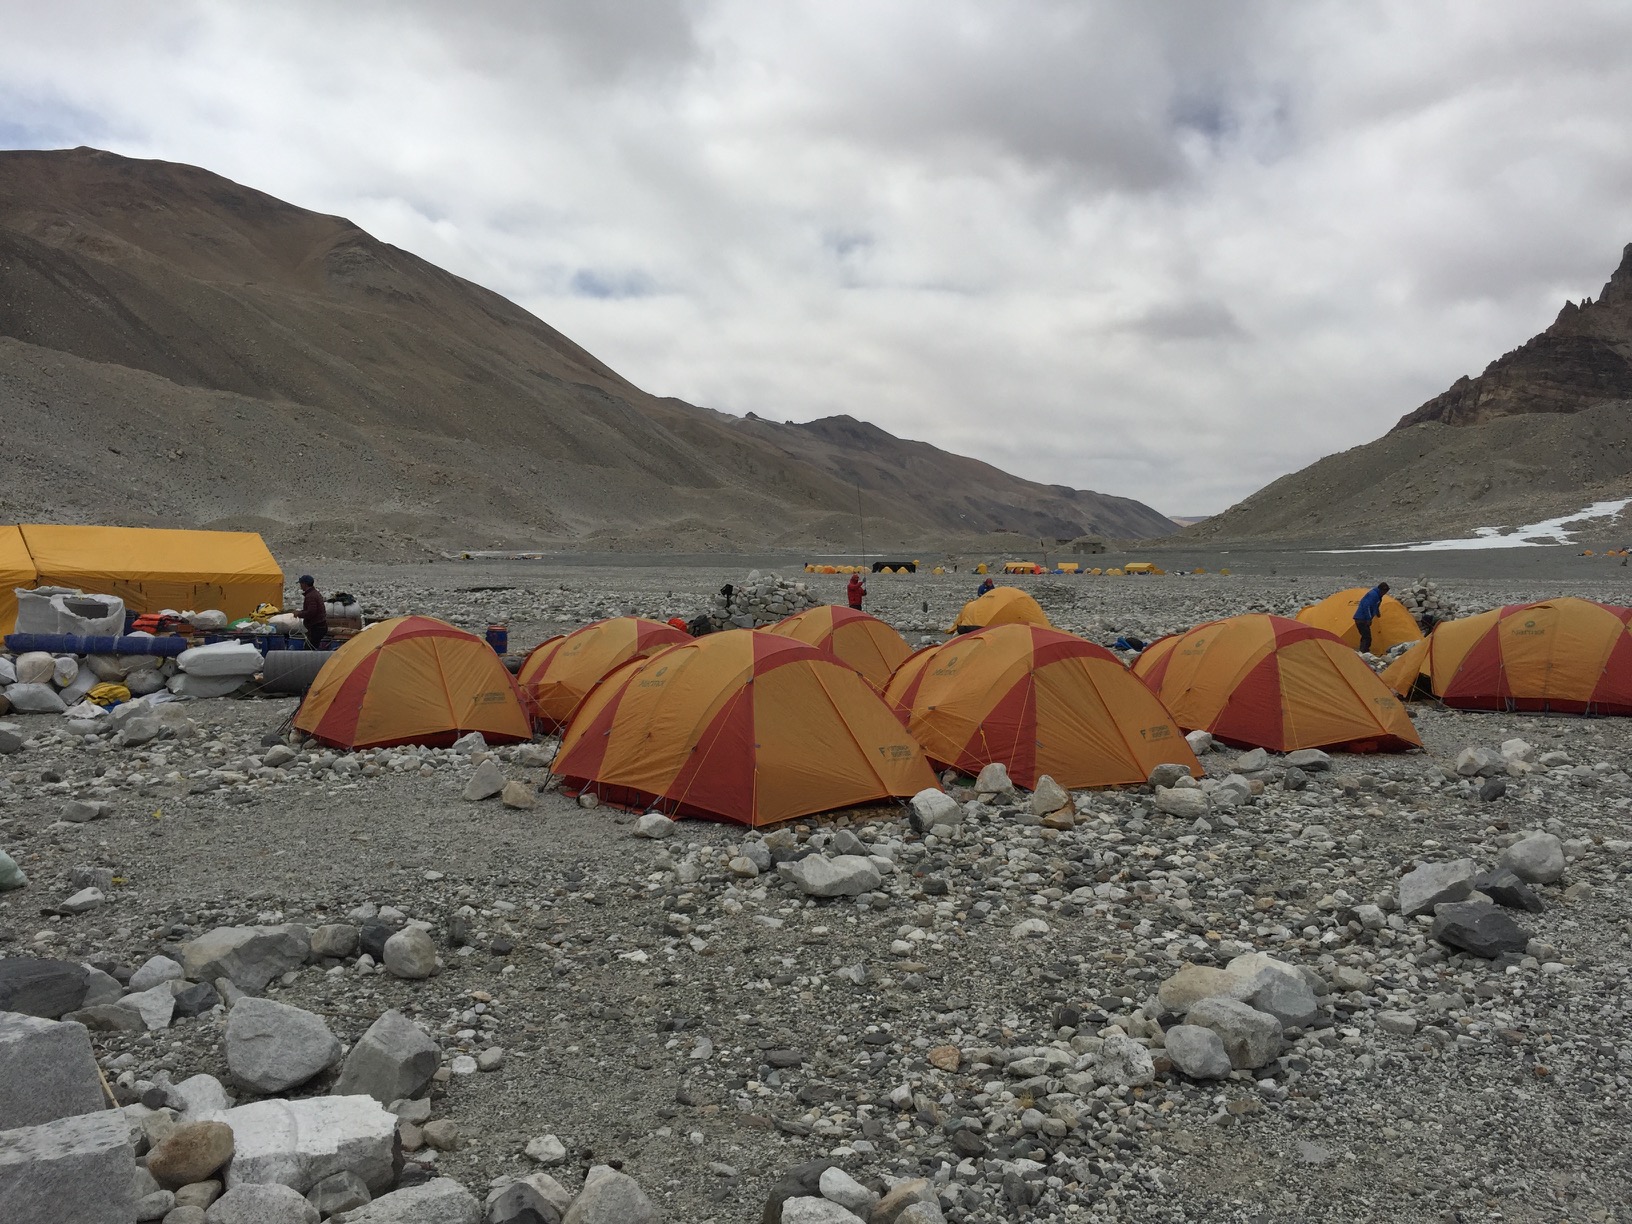 Arrived in Everest Base Camp (Tibet) – 5165m (approx.)